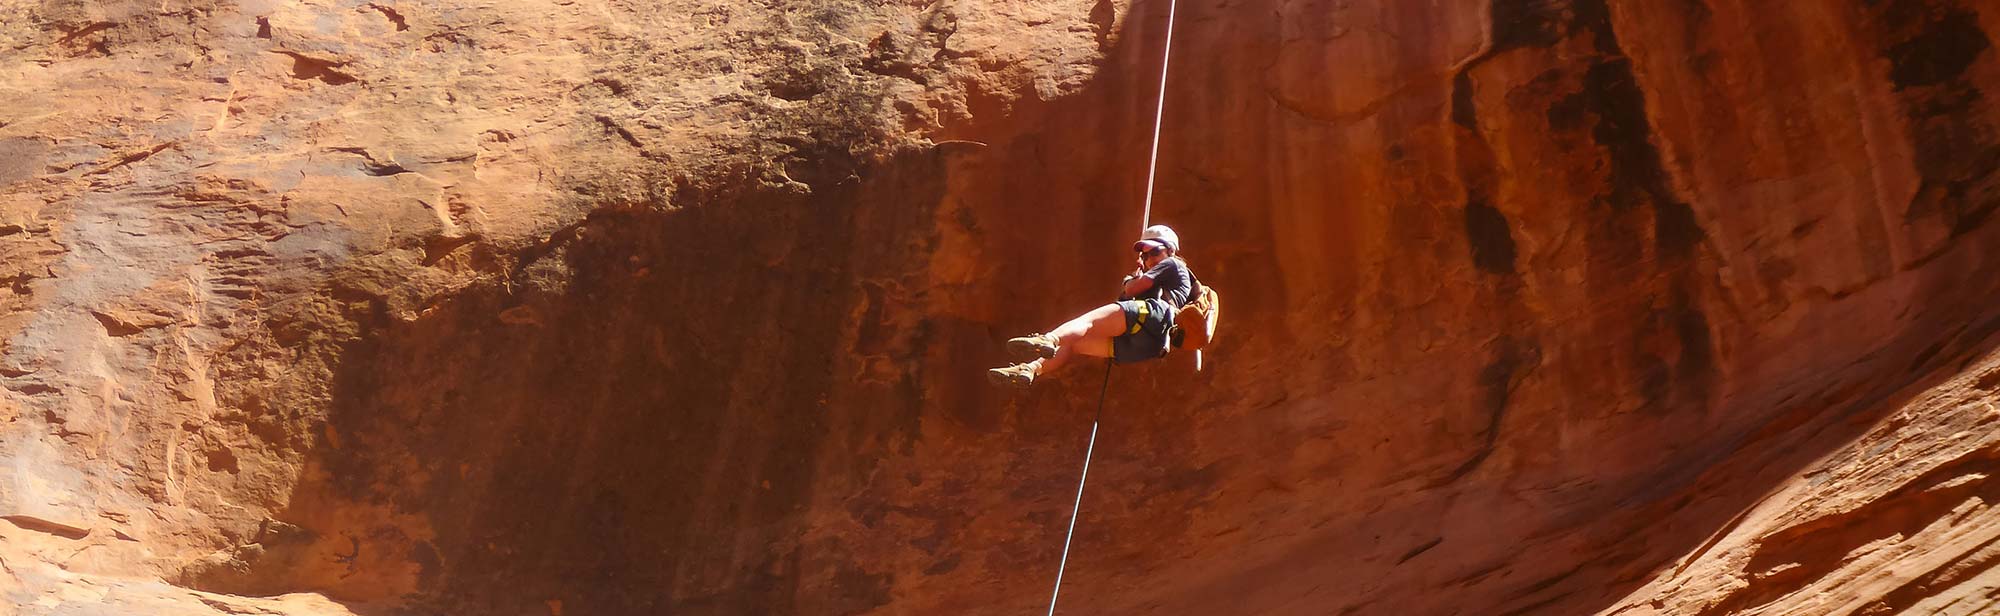 Rappelling down the canyon wall in the desert rocks.